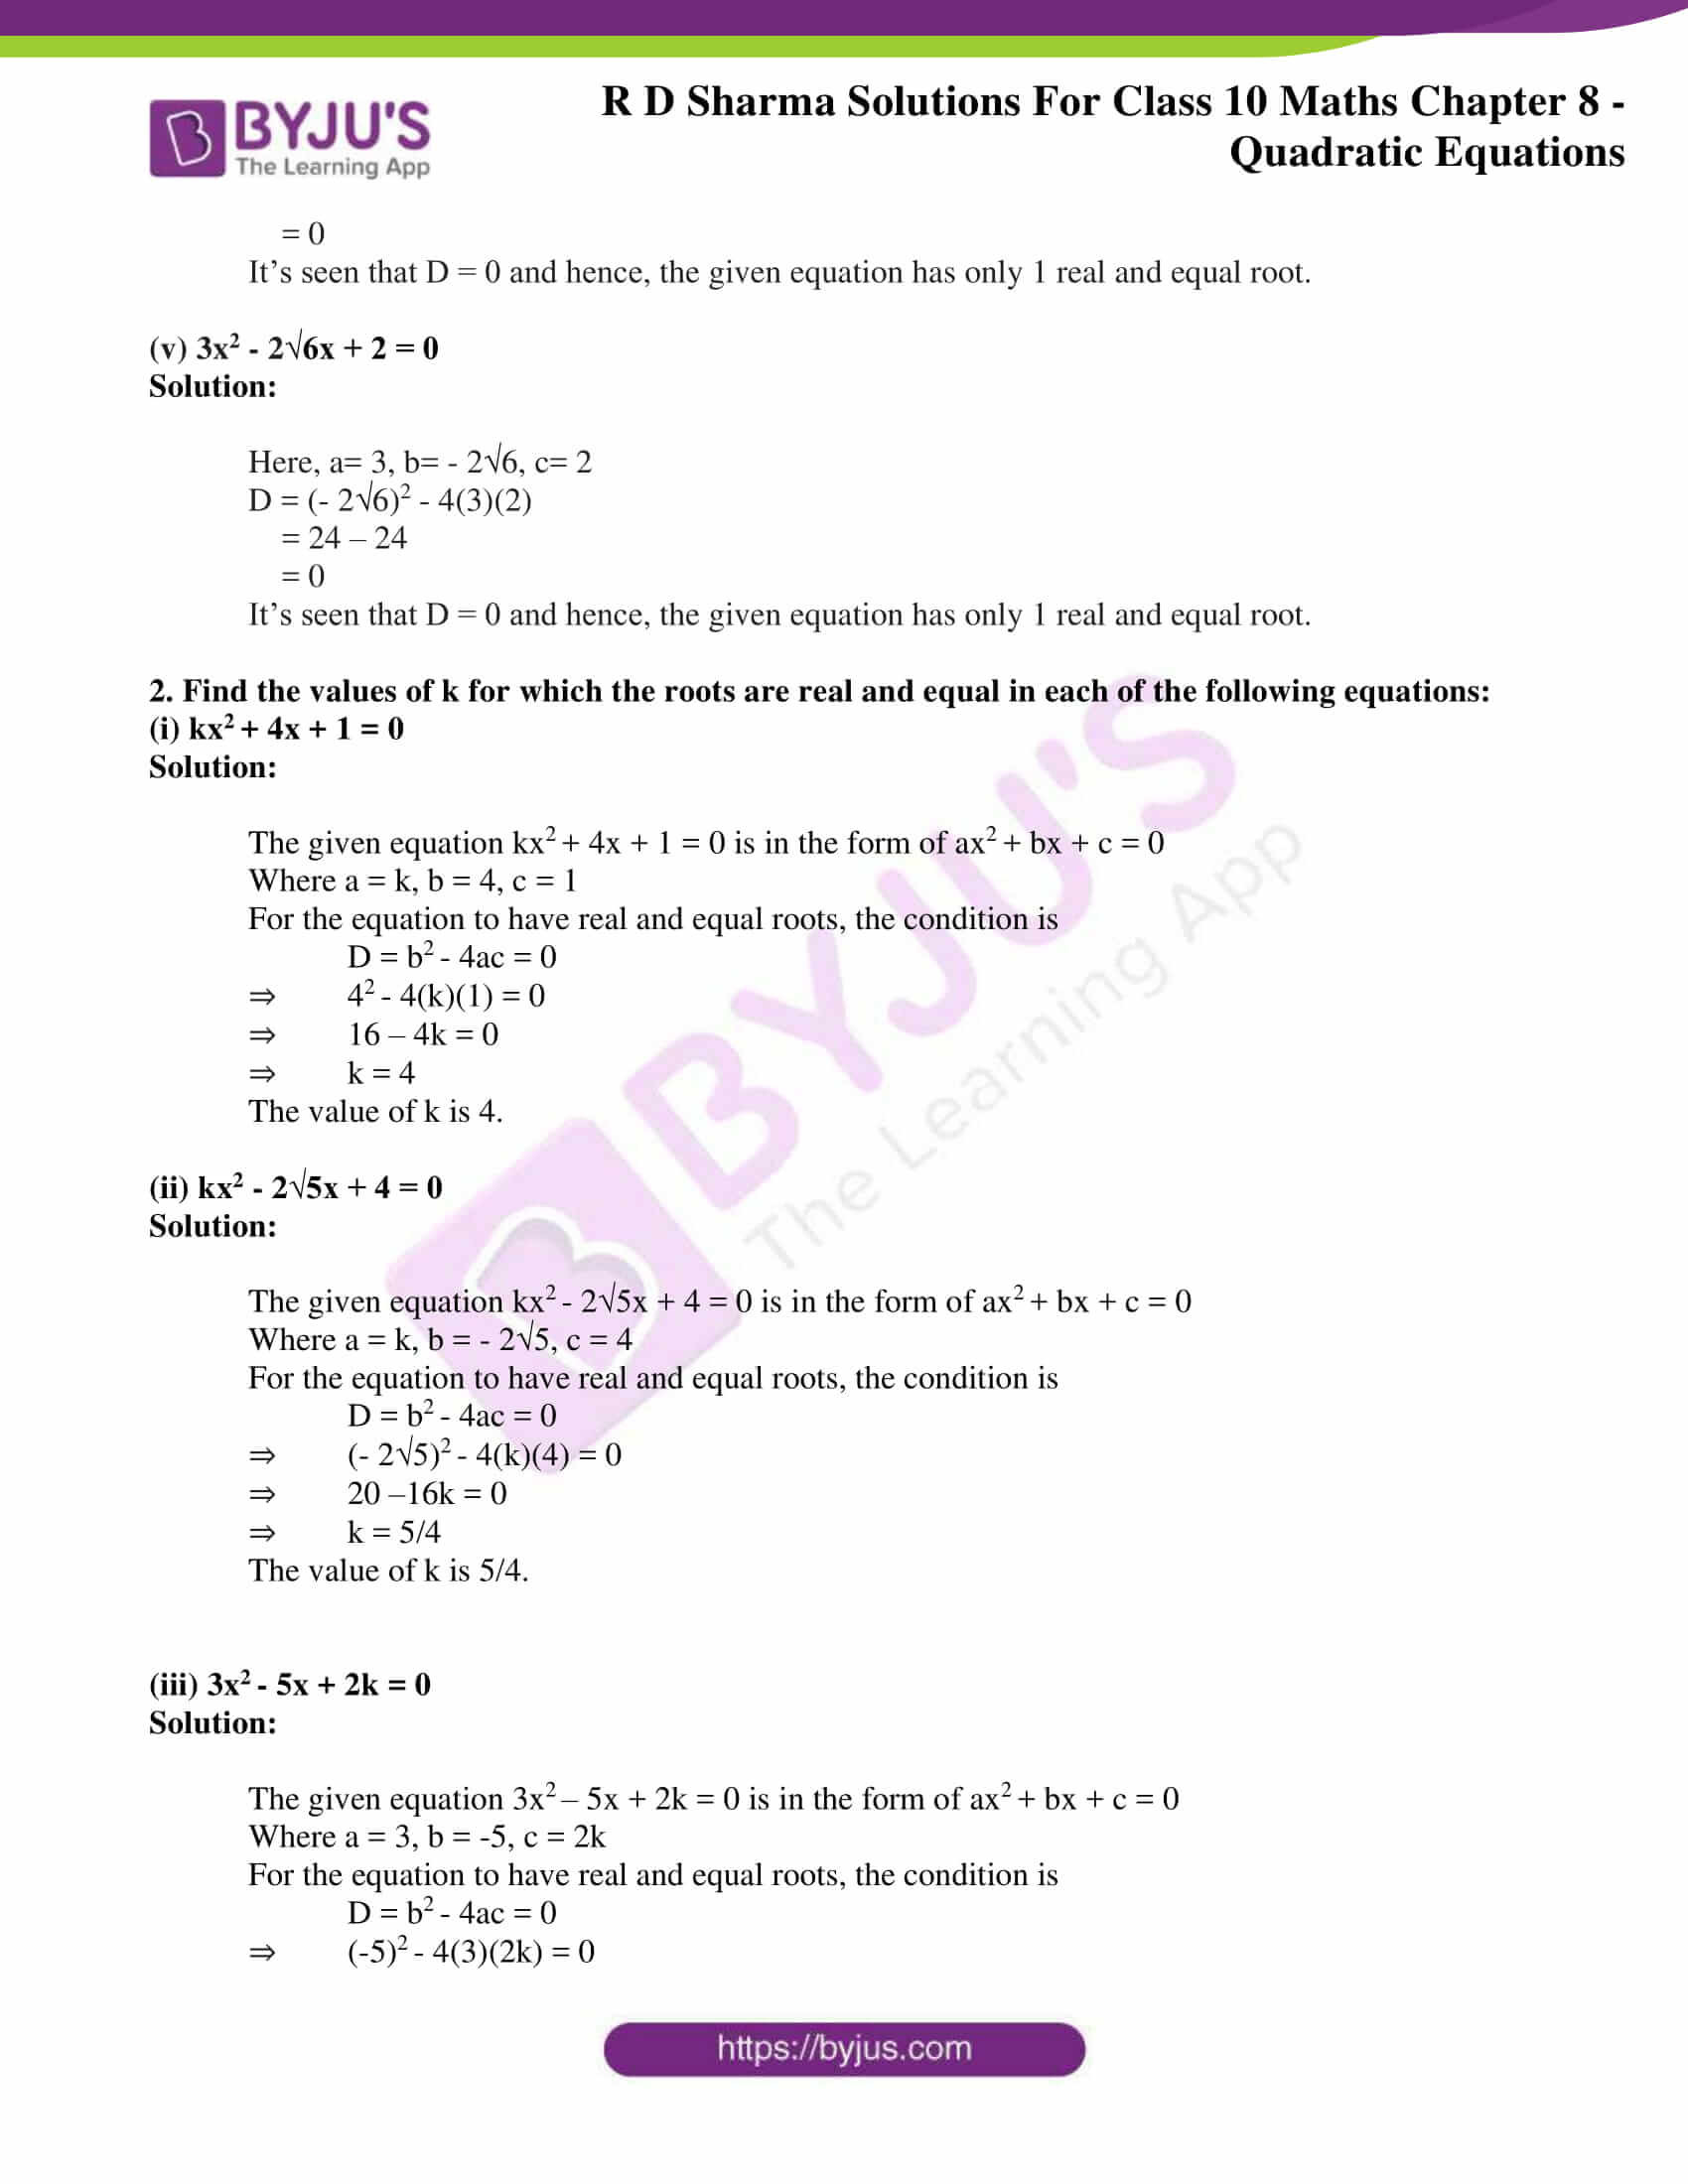 Quadratic Equation Worksheet with Answers Rd Sharma solutions for Class 10 Chapter 8 Quadratic